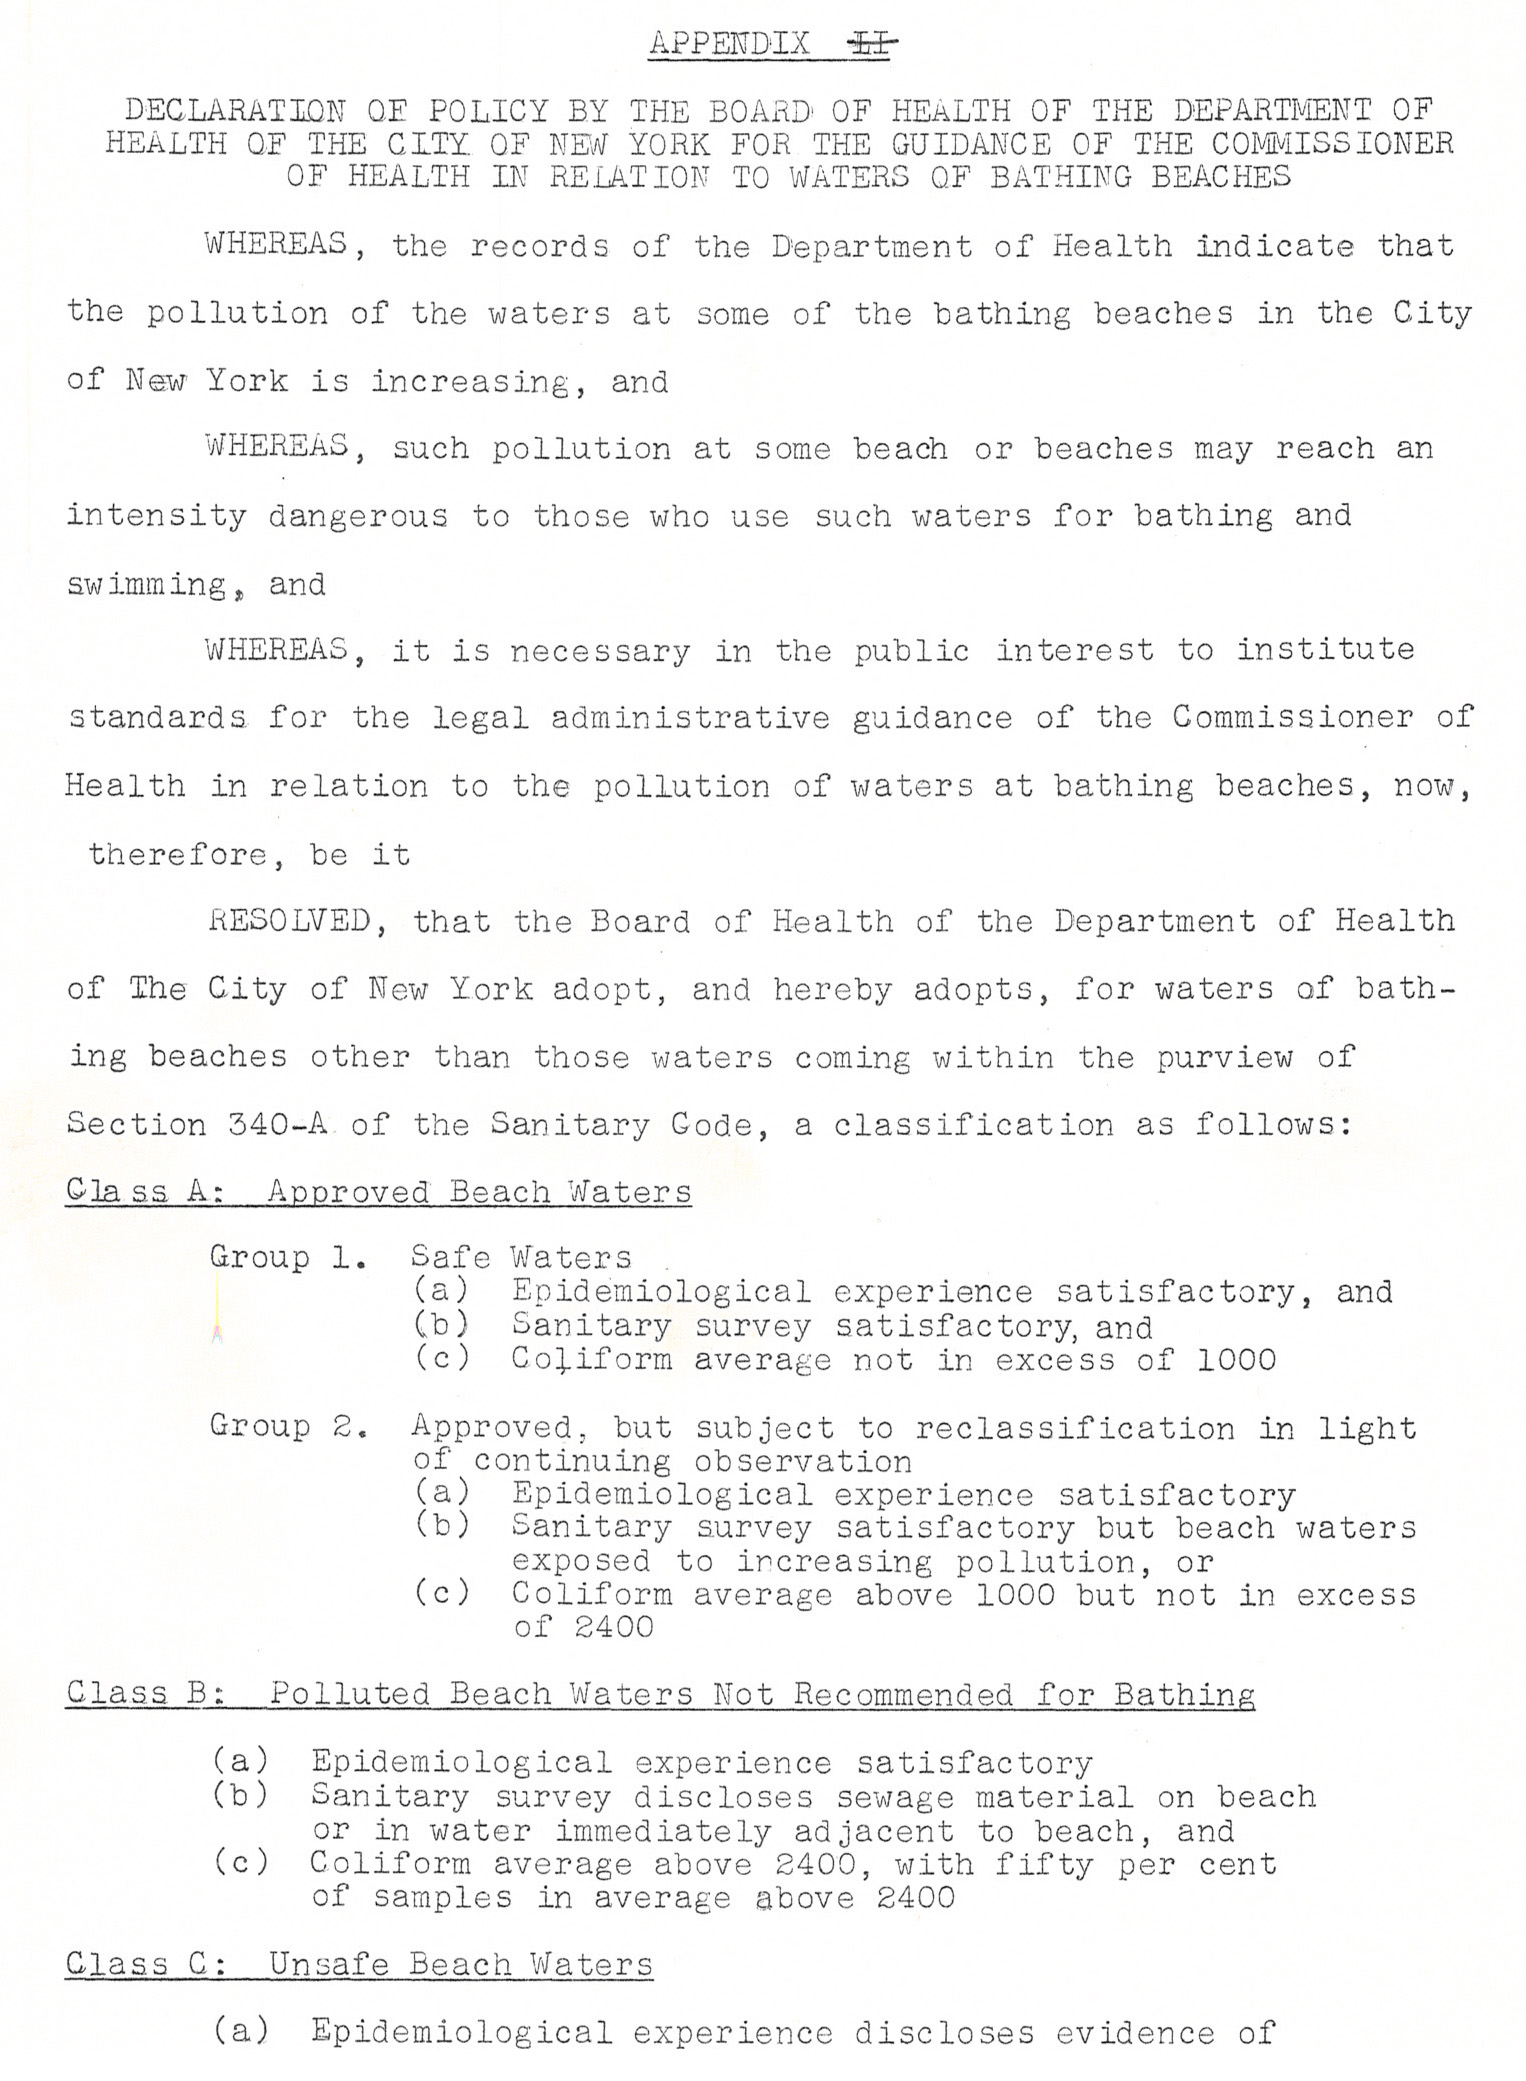 Black and white photo of a 1962 typewritten statement discussing water pollution in area bathing beaches.